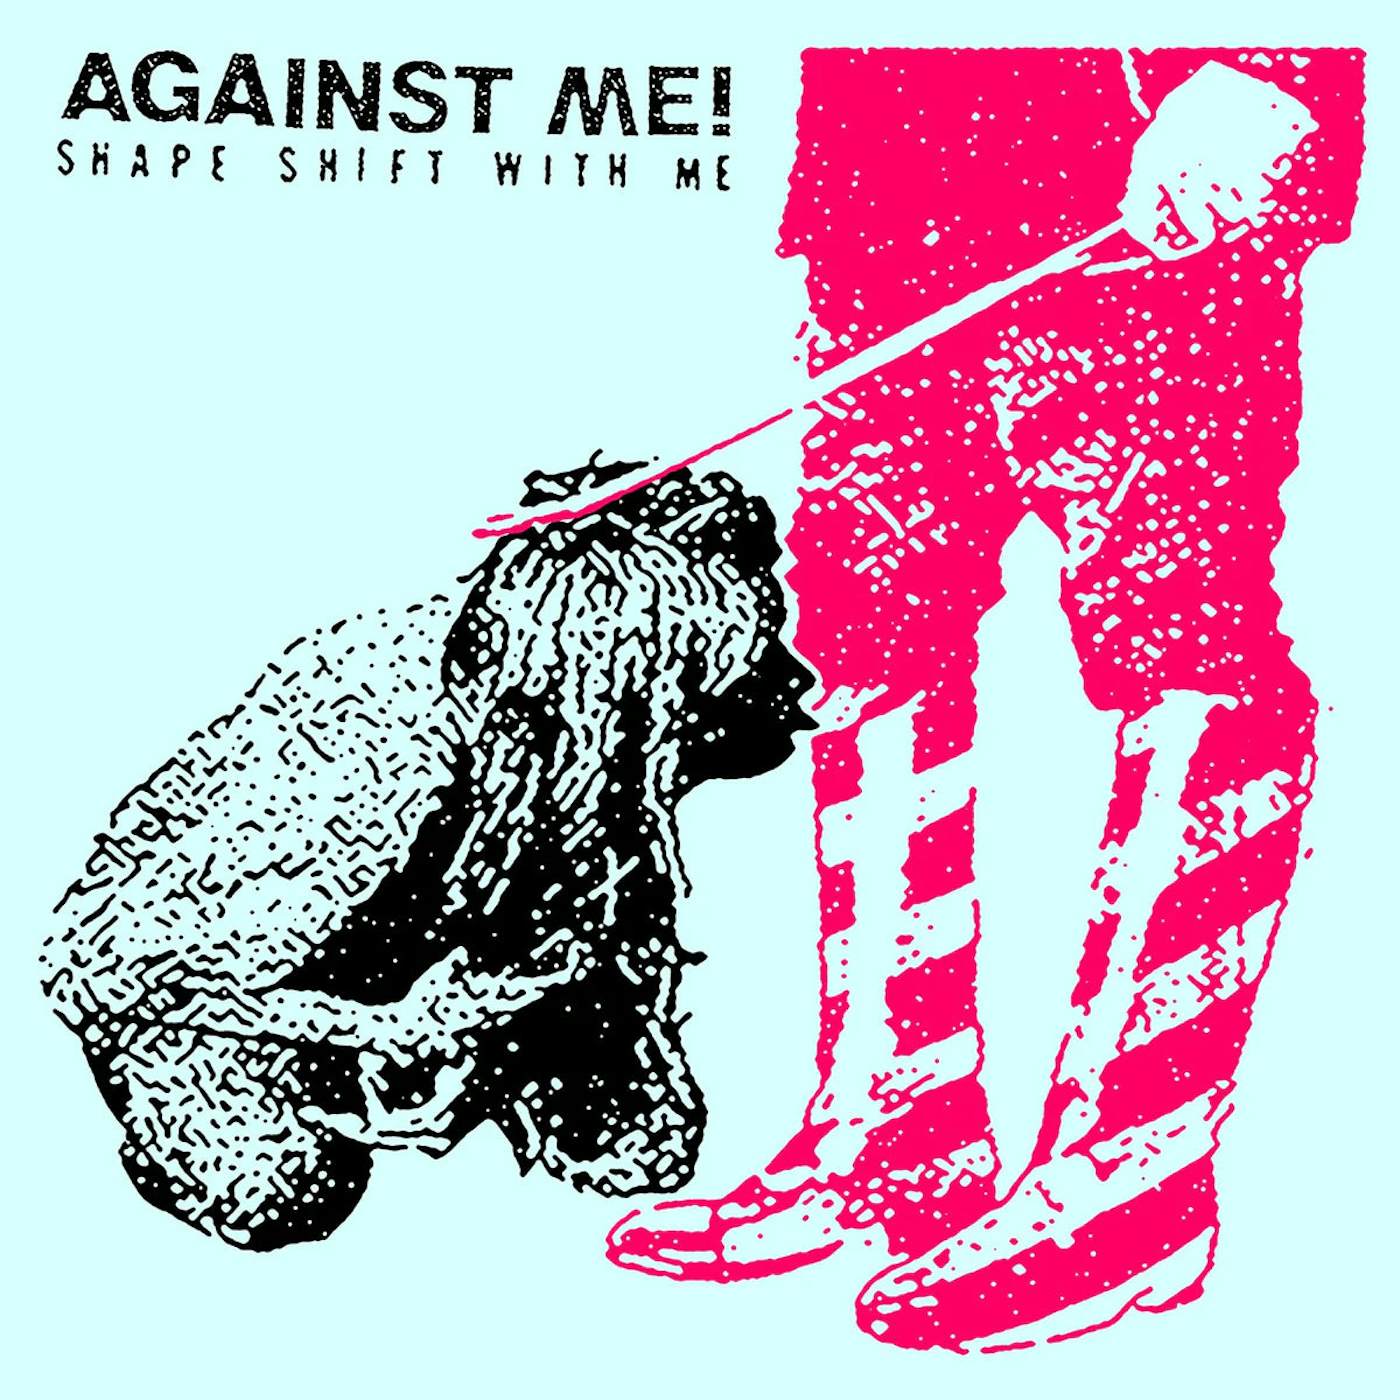 Against Me! CD - Shape Shift With Me